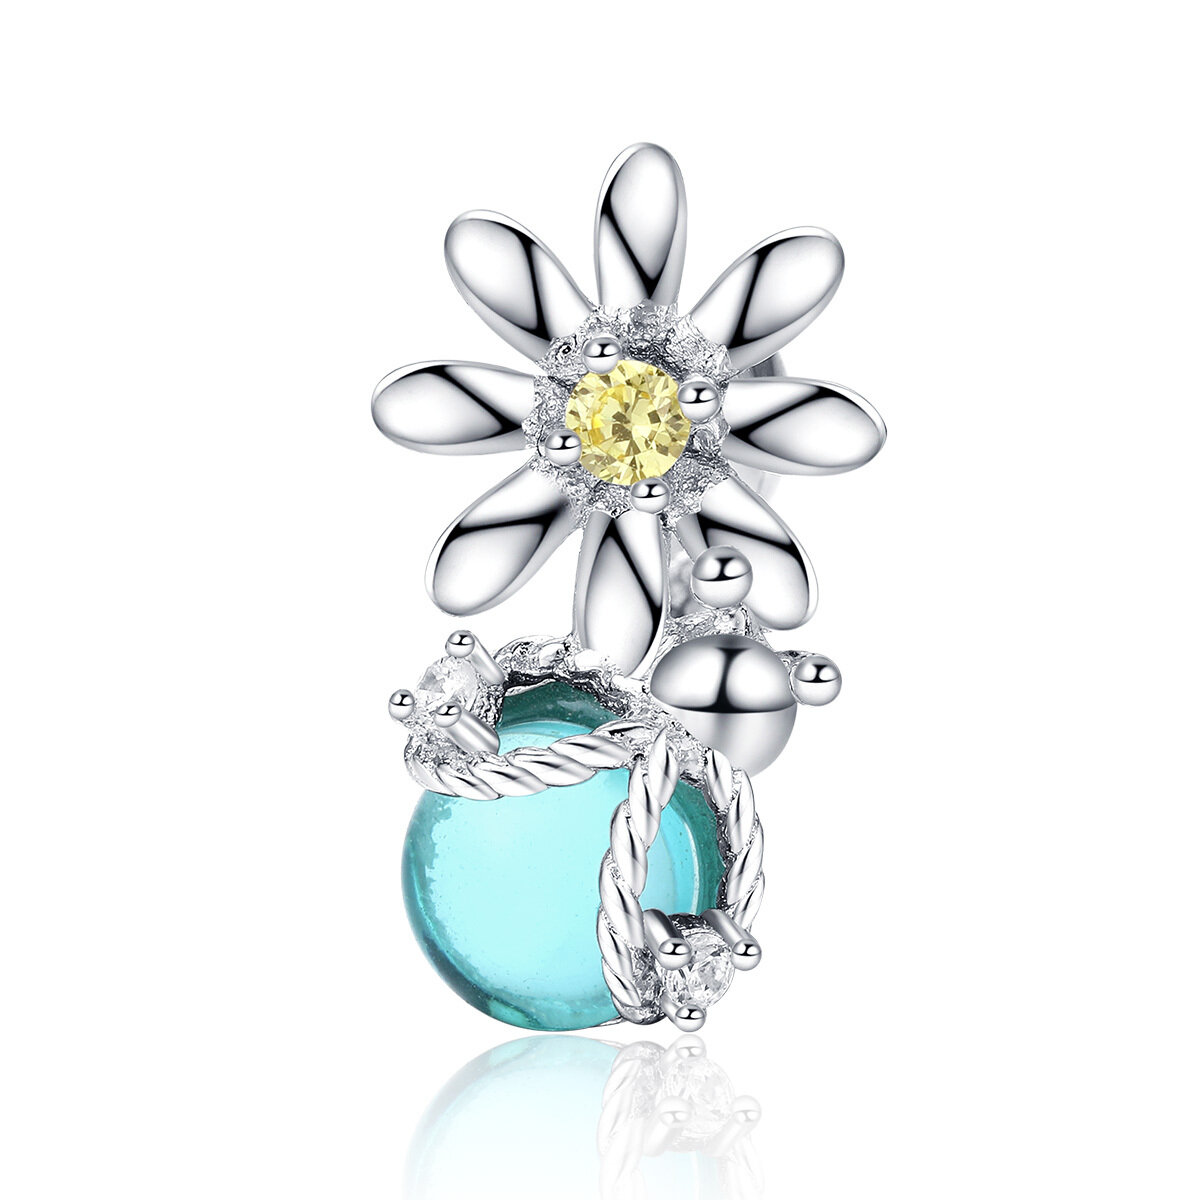 GemKing SCC1369 Fireflies and Daisy S925 Sterling Silver Charm